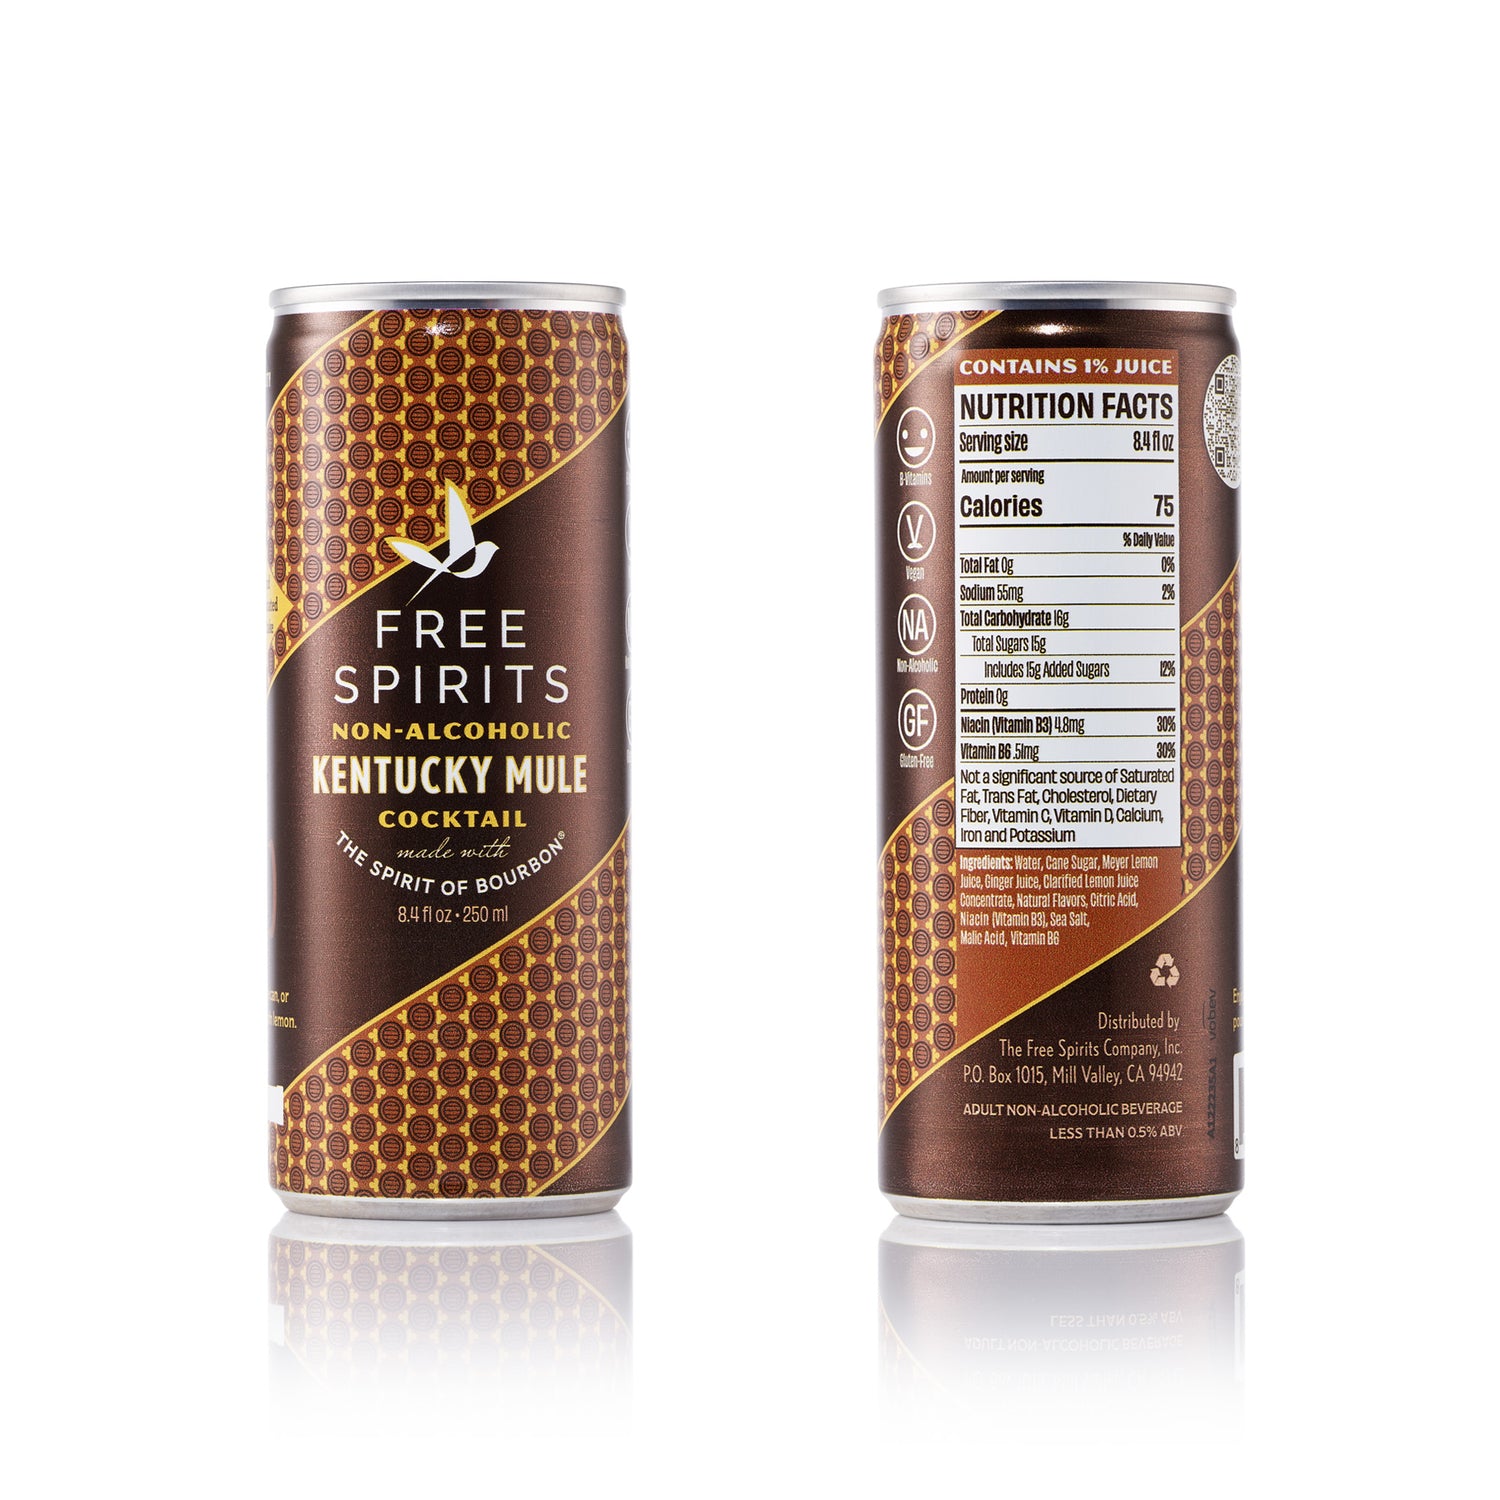 Free Spirits Kentucky Mule - front and back of can